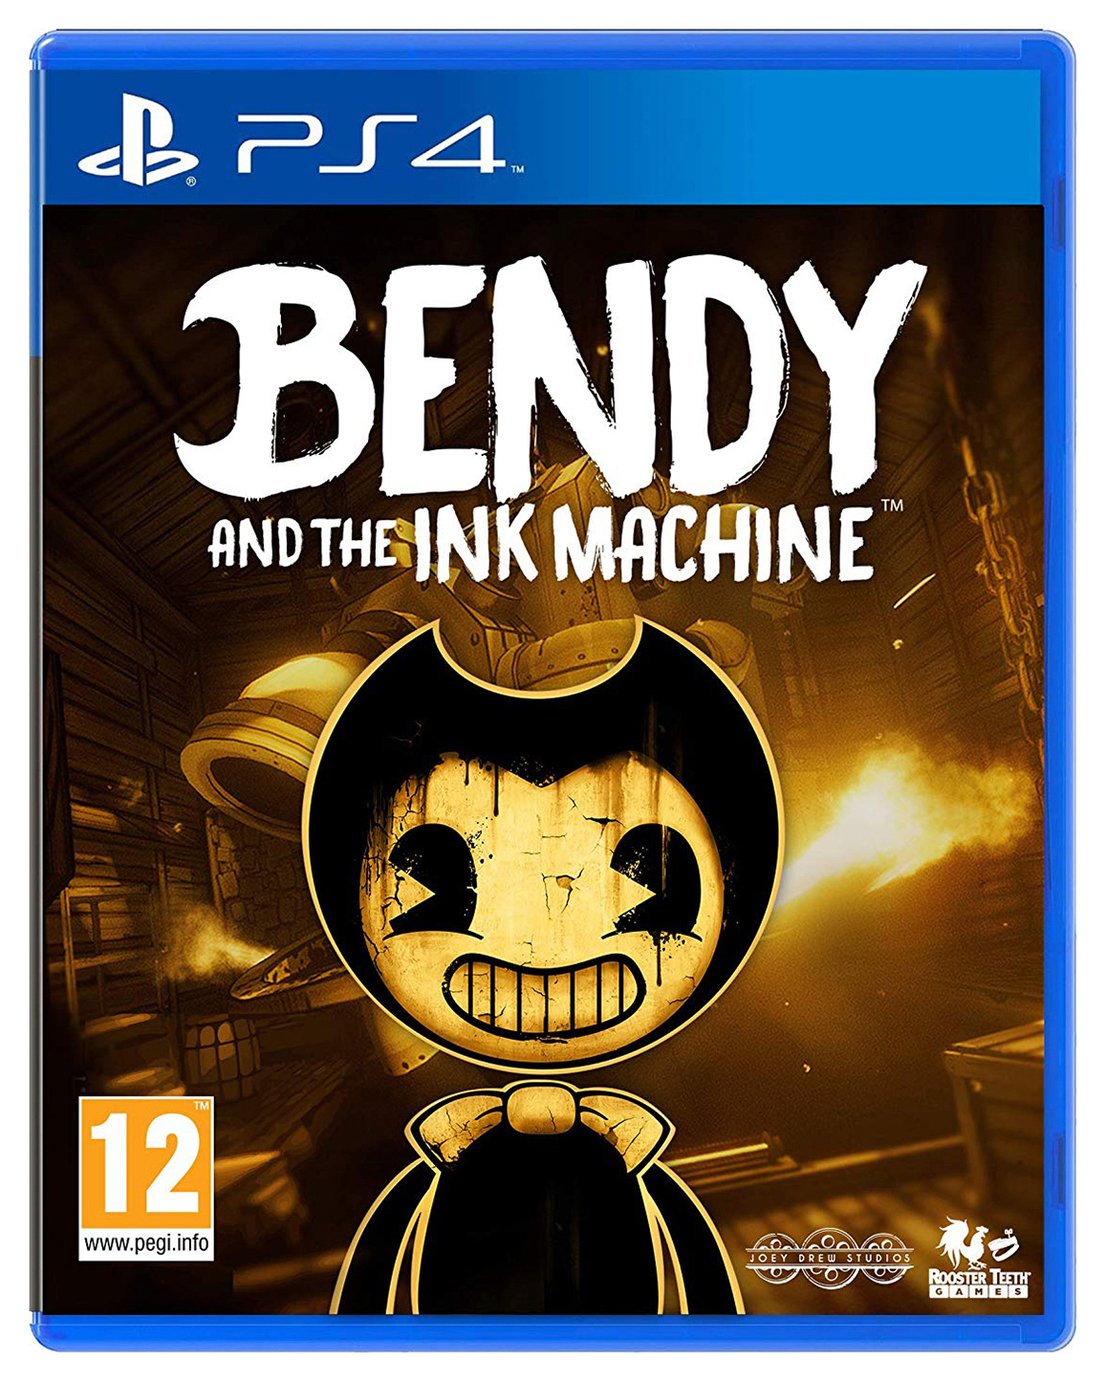 argos bendy and the ink machine toys